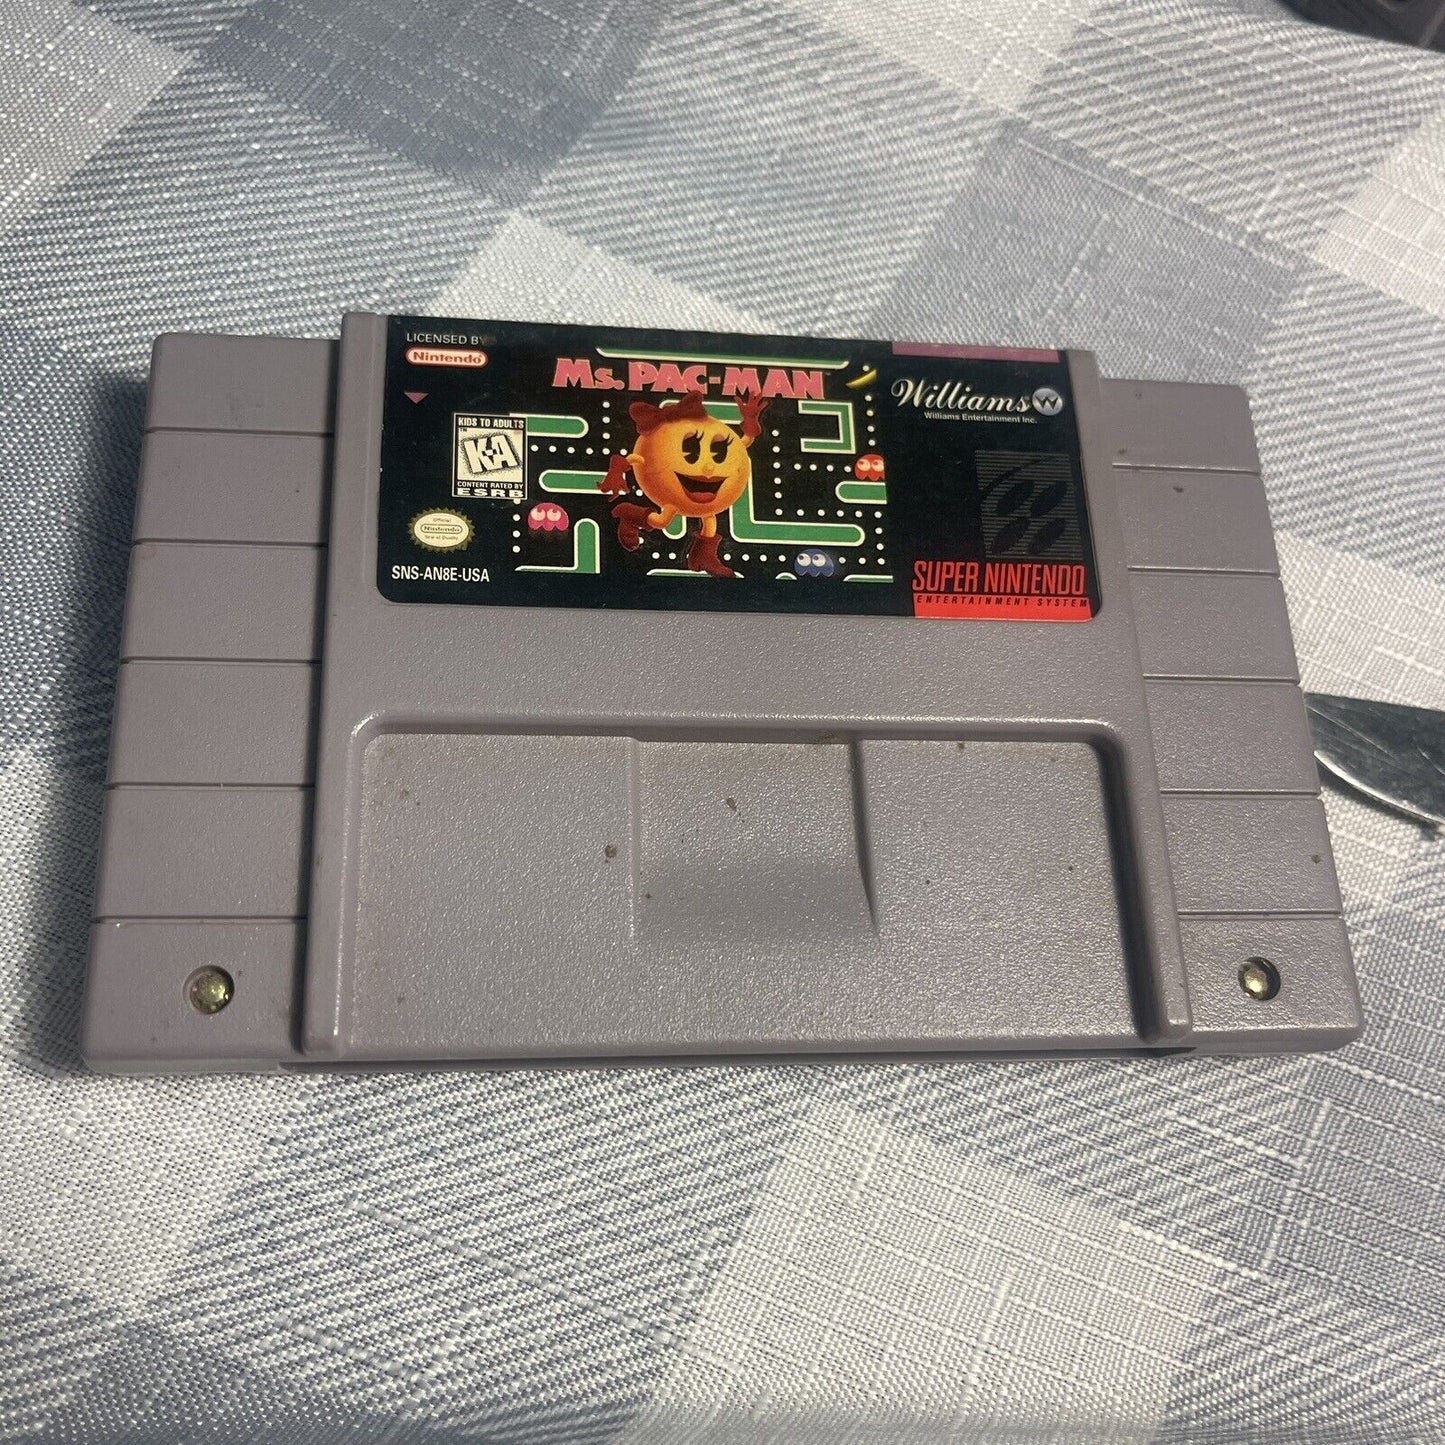 Ms Pac-Man (Super Nintnedo, SNES) (SNS-AN8E-USA) Cleaned & Tested